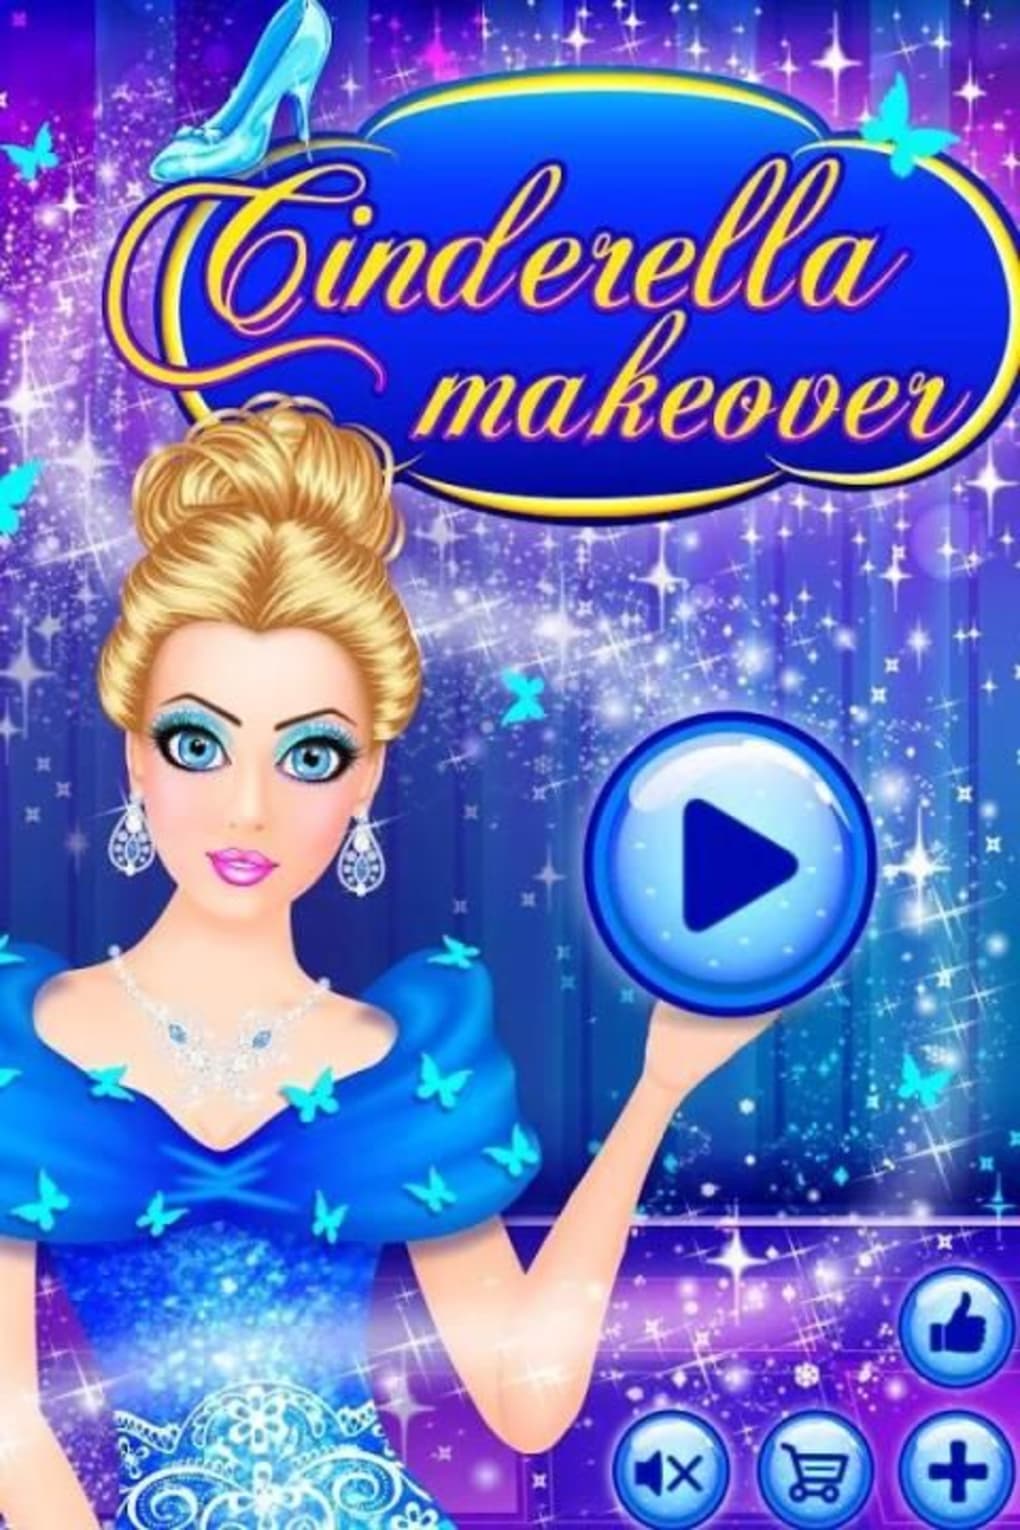 Princess Beauty Salon Makeover Dress Up For Girls para Android - Download